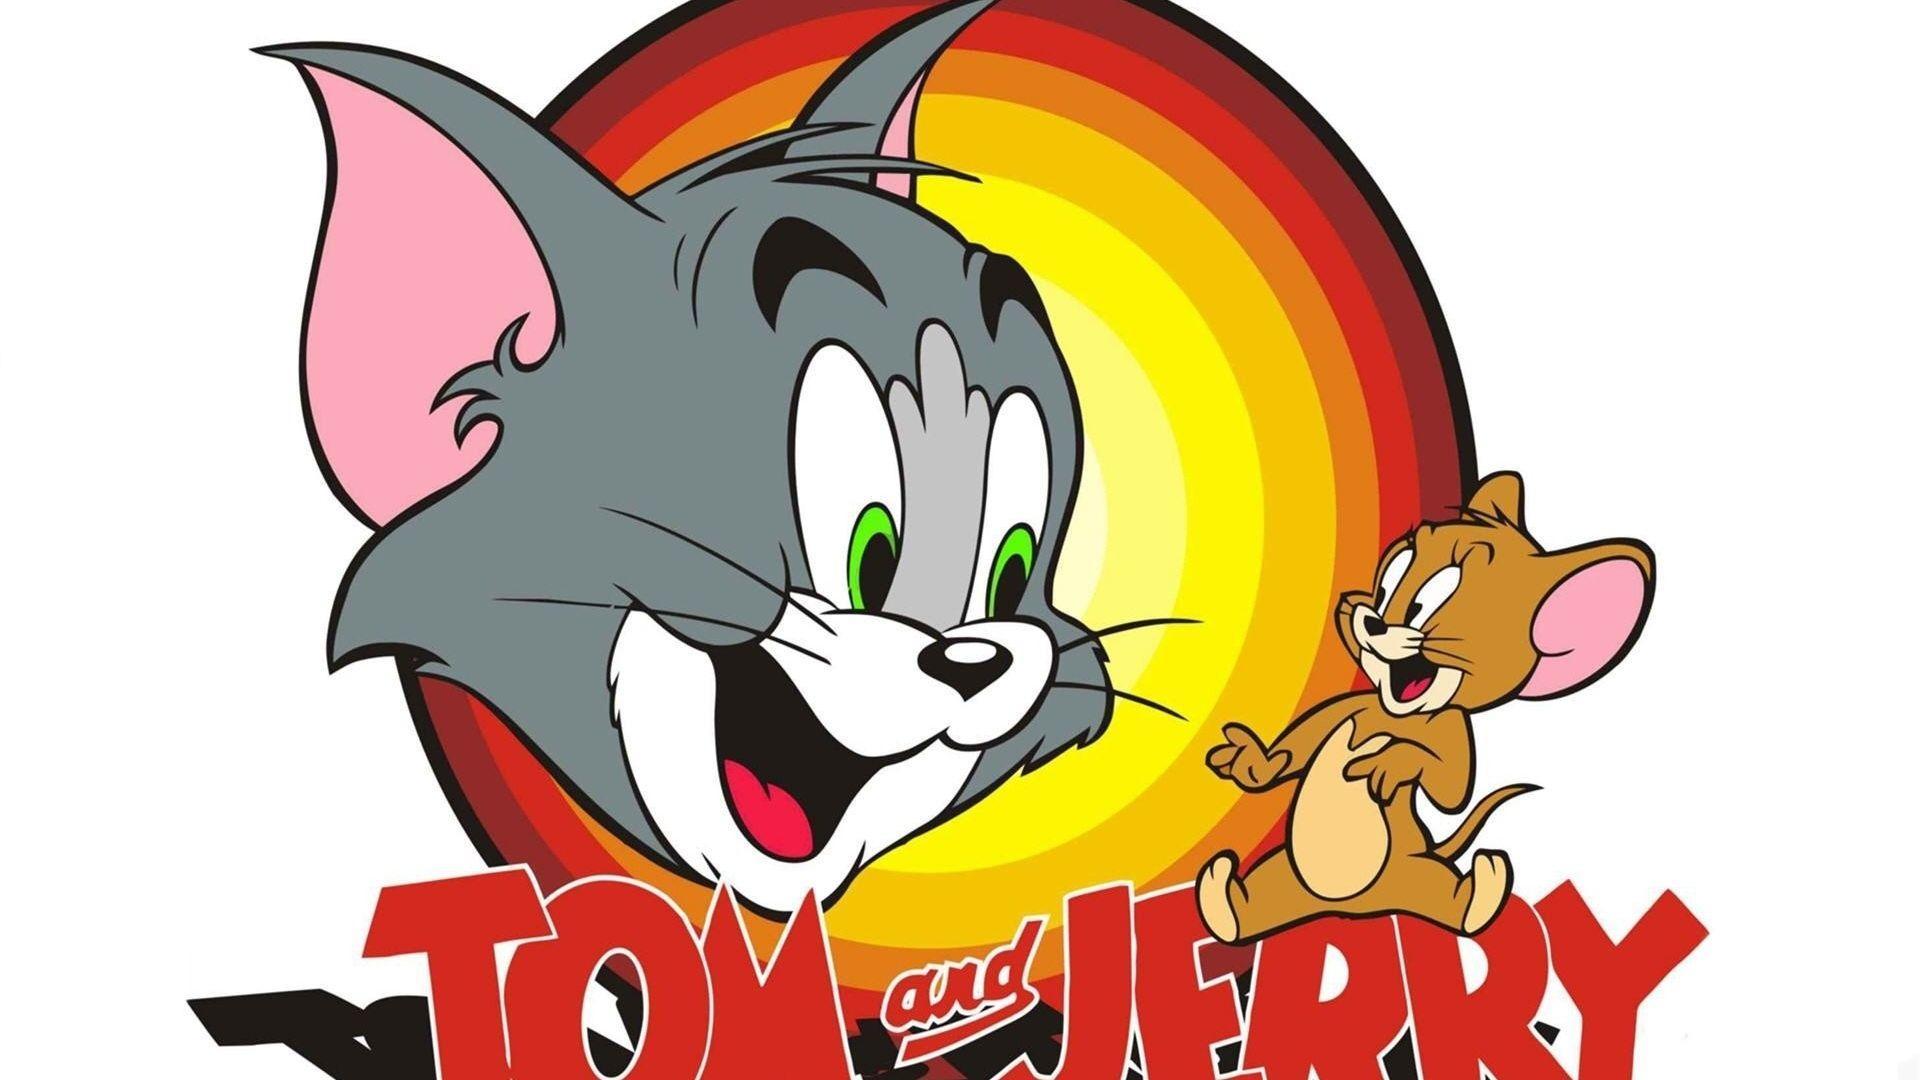 Full HD 1080p Tom and jerry Wallpaper HD, Desktop Background